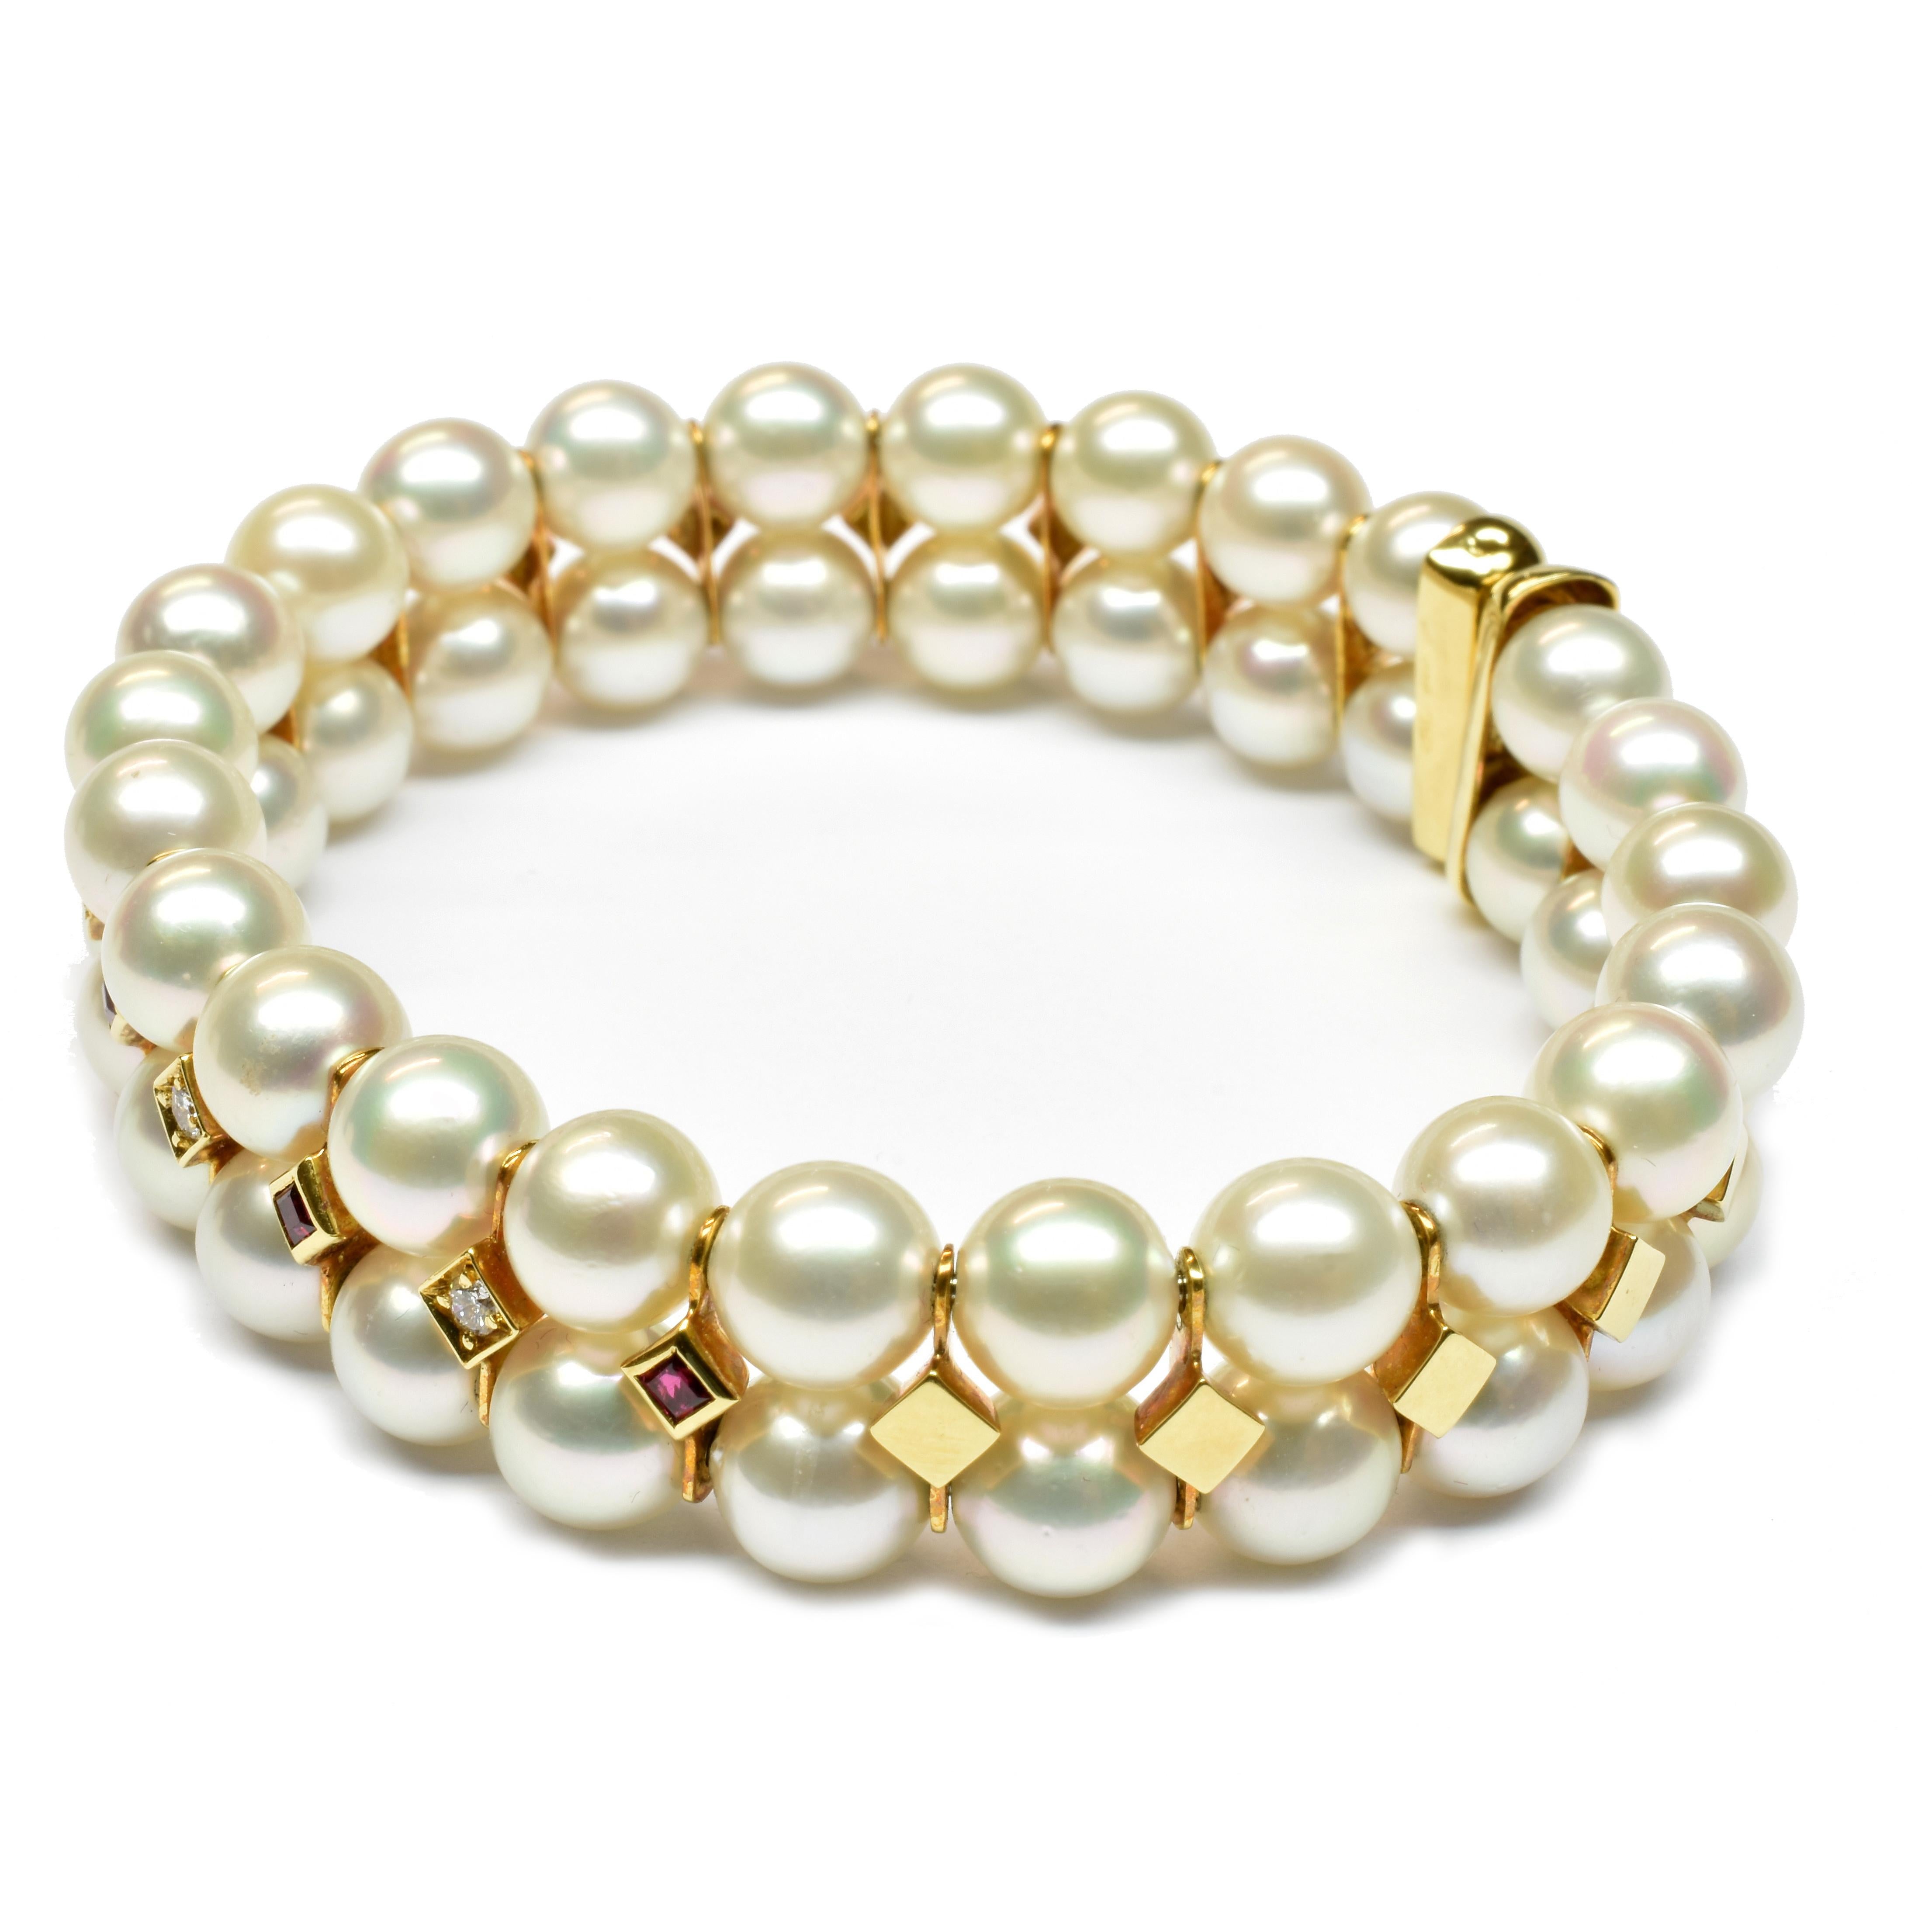 Gilberto Cassola 18Kt Yellow Gold Flexible Bracelet with a double row of 7 mm Japanese Cultured Natural Pearls (Akoya). 
Top Quality Pearls with a high grade of roundness and color. Carrè Cut Rubies and Round Diamonds in the middle. 
Two 18Kt White